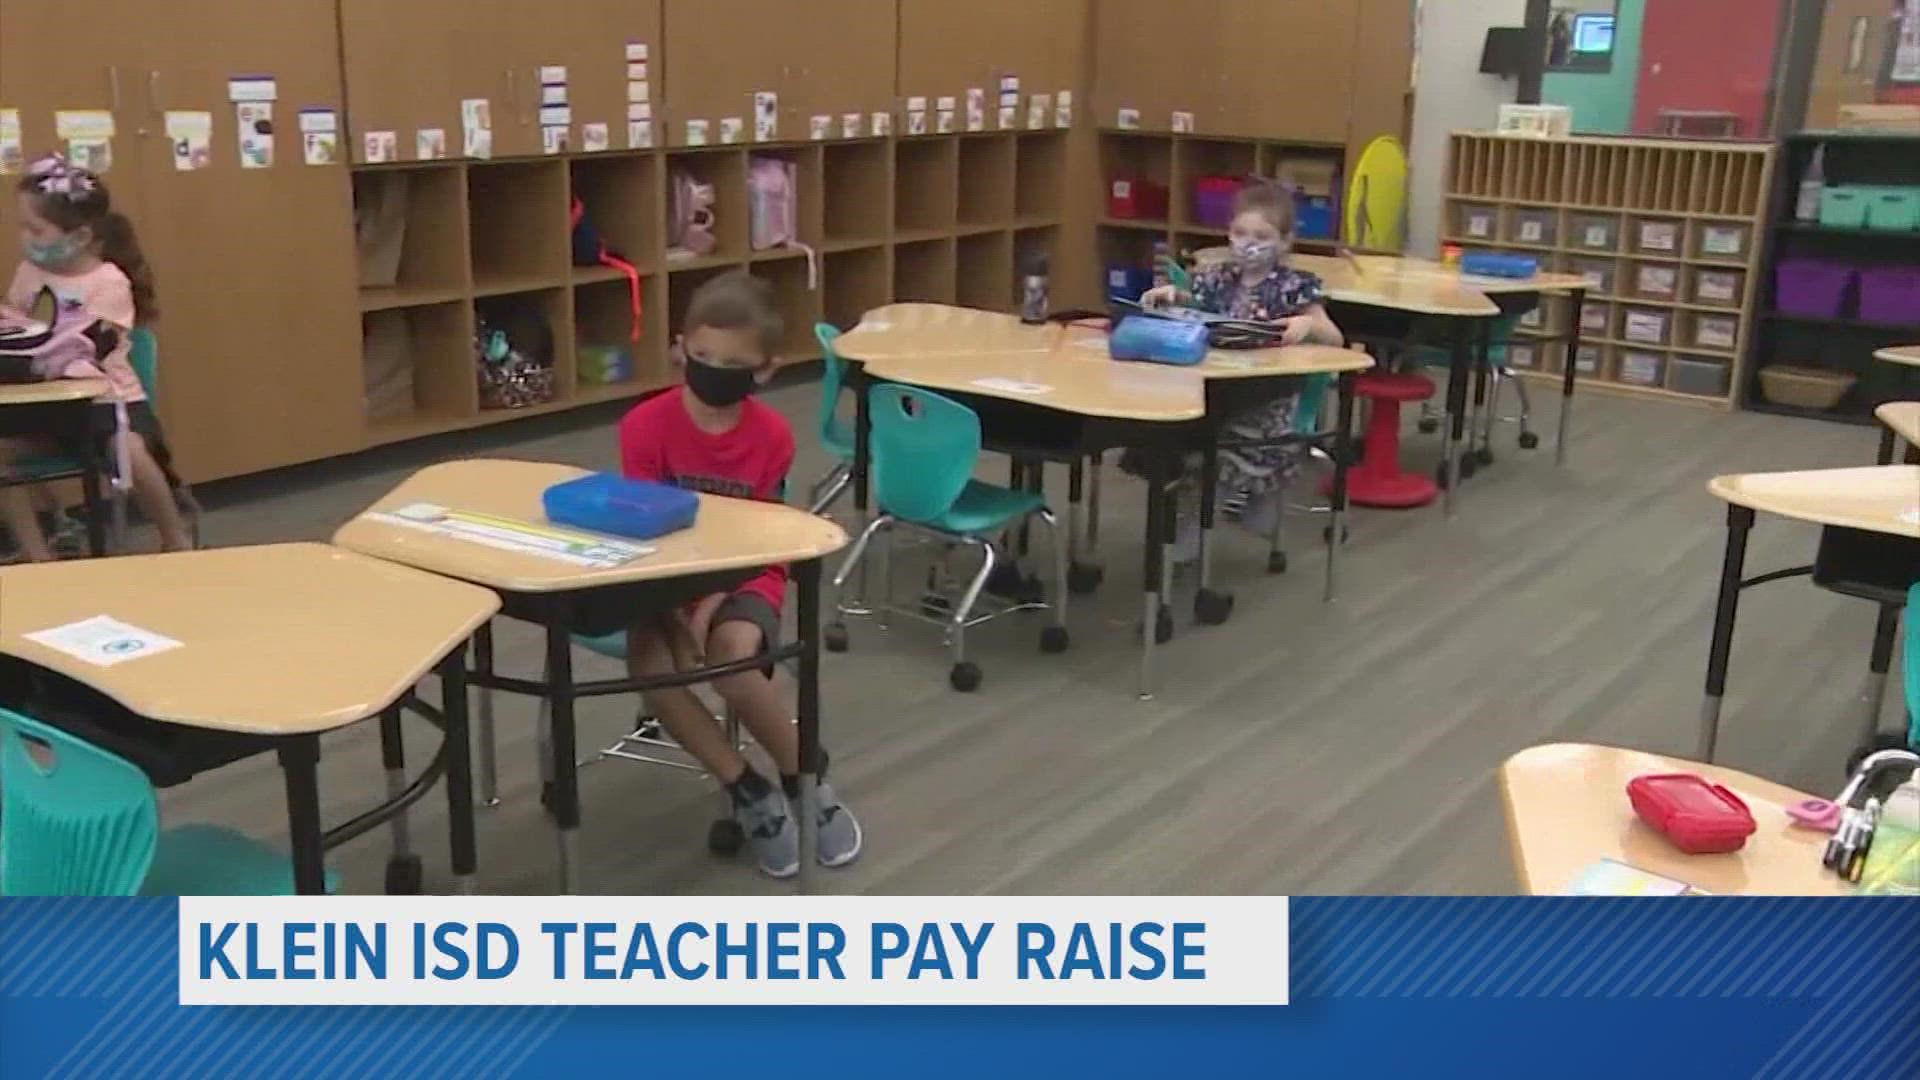 Klein ISD joins other Greater Houston-area school districts looking to offer teachers more competitive pay and benefits.